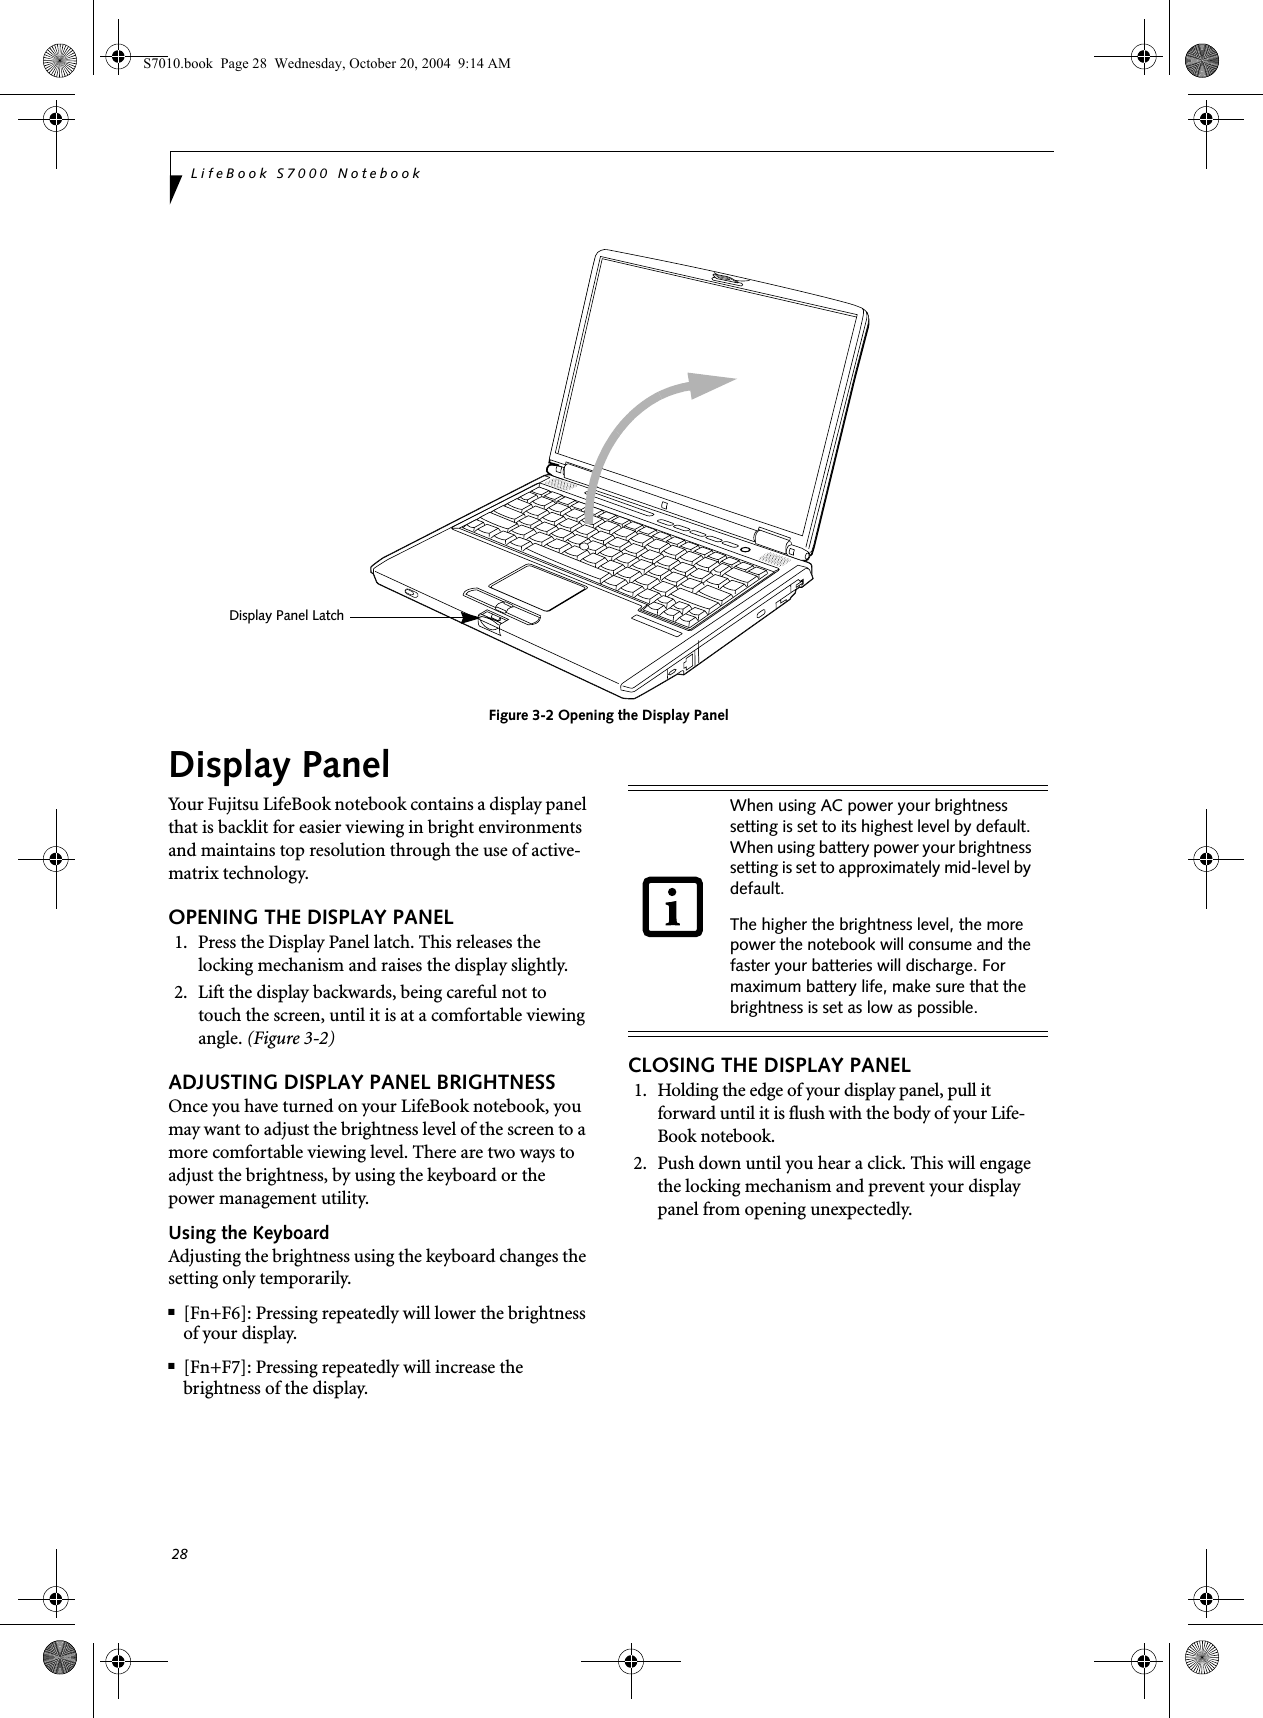 28LifeBook S7000 NotebookFigure 3-2 Opening the Display PanelDisplay PanelYour Fujitsu LifeBook notebook contains a display panel that is backlit for easier viewing in bright environments and maintains top resolution through the use of active-matrix technology. OPENING THE DISPLAY PANEL1. Press the Display Panel latch. This releases the locking mechanism and raises the display slightly.2. Lift the display backwards, being careful not to touch the screen, until it is at a comfortable viewing angle. (Figure 3-2)ADJUSTING DISPLAY PANEL BRIGHTNESSOnce you have turned on your LifeBook notebook, you may want to adjust the brightness level of the screen to a more comfortable viewing level. There are two ways to adjust the brightness, by using the keyboard or the power management utility. Using the KeyboardAdjusting the brightness using the keyboard changes the setting only temporarily. ■[Fn+F6]: Pressing repeatedly will lower the brightness of your display.■[Fn+F7]: Pressing repeatedly will increase thebrightness of the display. CLOSING THE DISPLAY PANEL1. Holding the edge of your display panel, pull it forward until it is flush with the body of your Life-Book notebook. 2. Push down until you hear a click. This will engage the locking mechanism and prevent your display panel from opening unexpectedly.Display Panel LatchWhen using AC power your brightness setting is set to its highest level by default. When using battery power your brightness setting is set to approximately mid-level by default.The higher the brightness level, the more power the notebook will consume and the faster your batteries will discharge. For maximum battery life, make sure that the brightness is set as low as possible.S7010.book  Page 28  Wednesday, October 20, 2004  9:14 AM